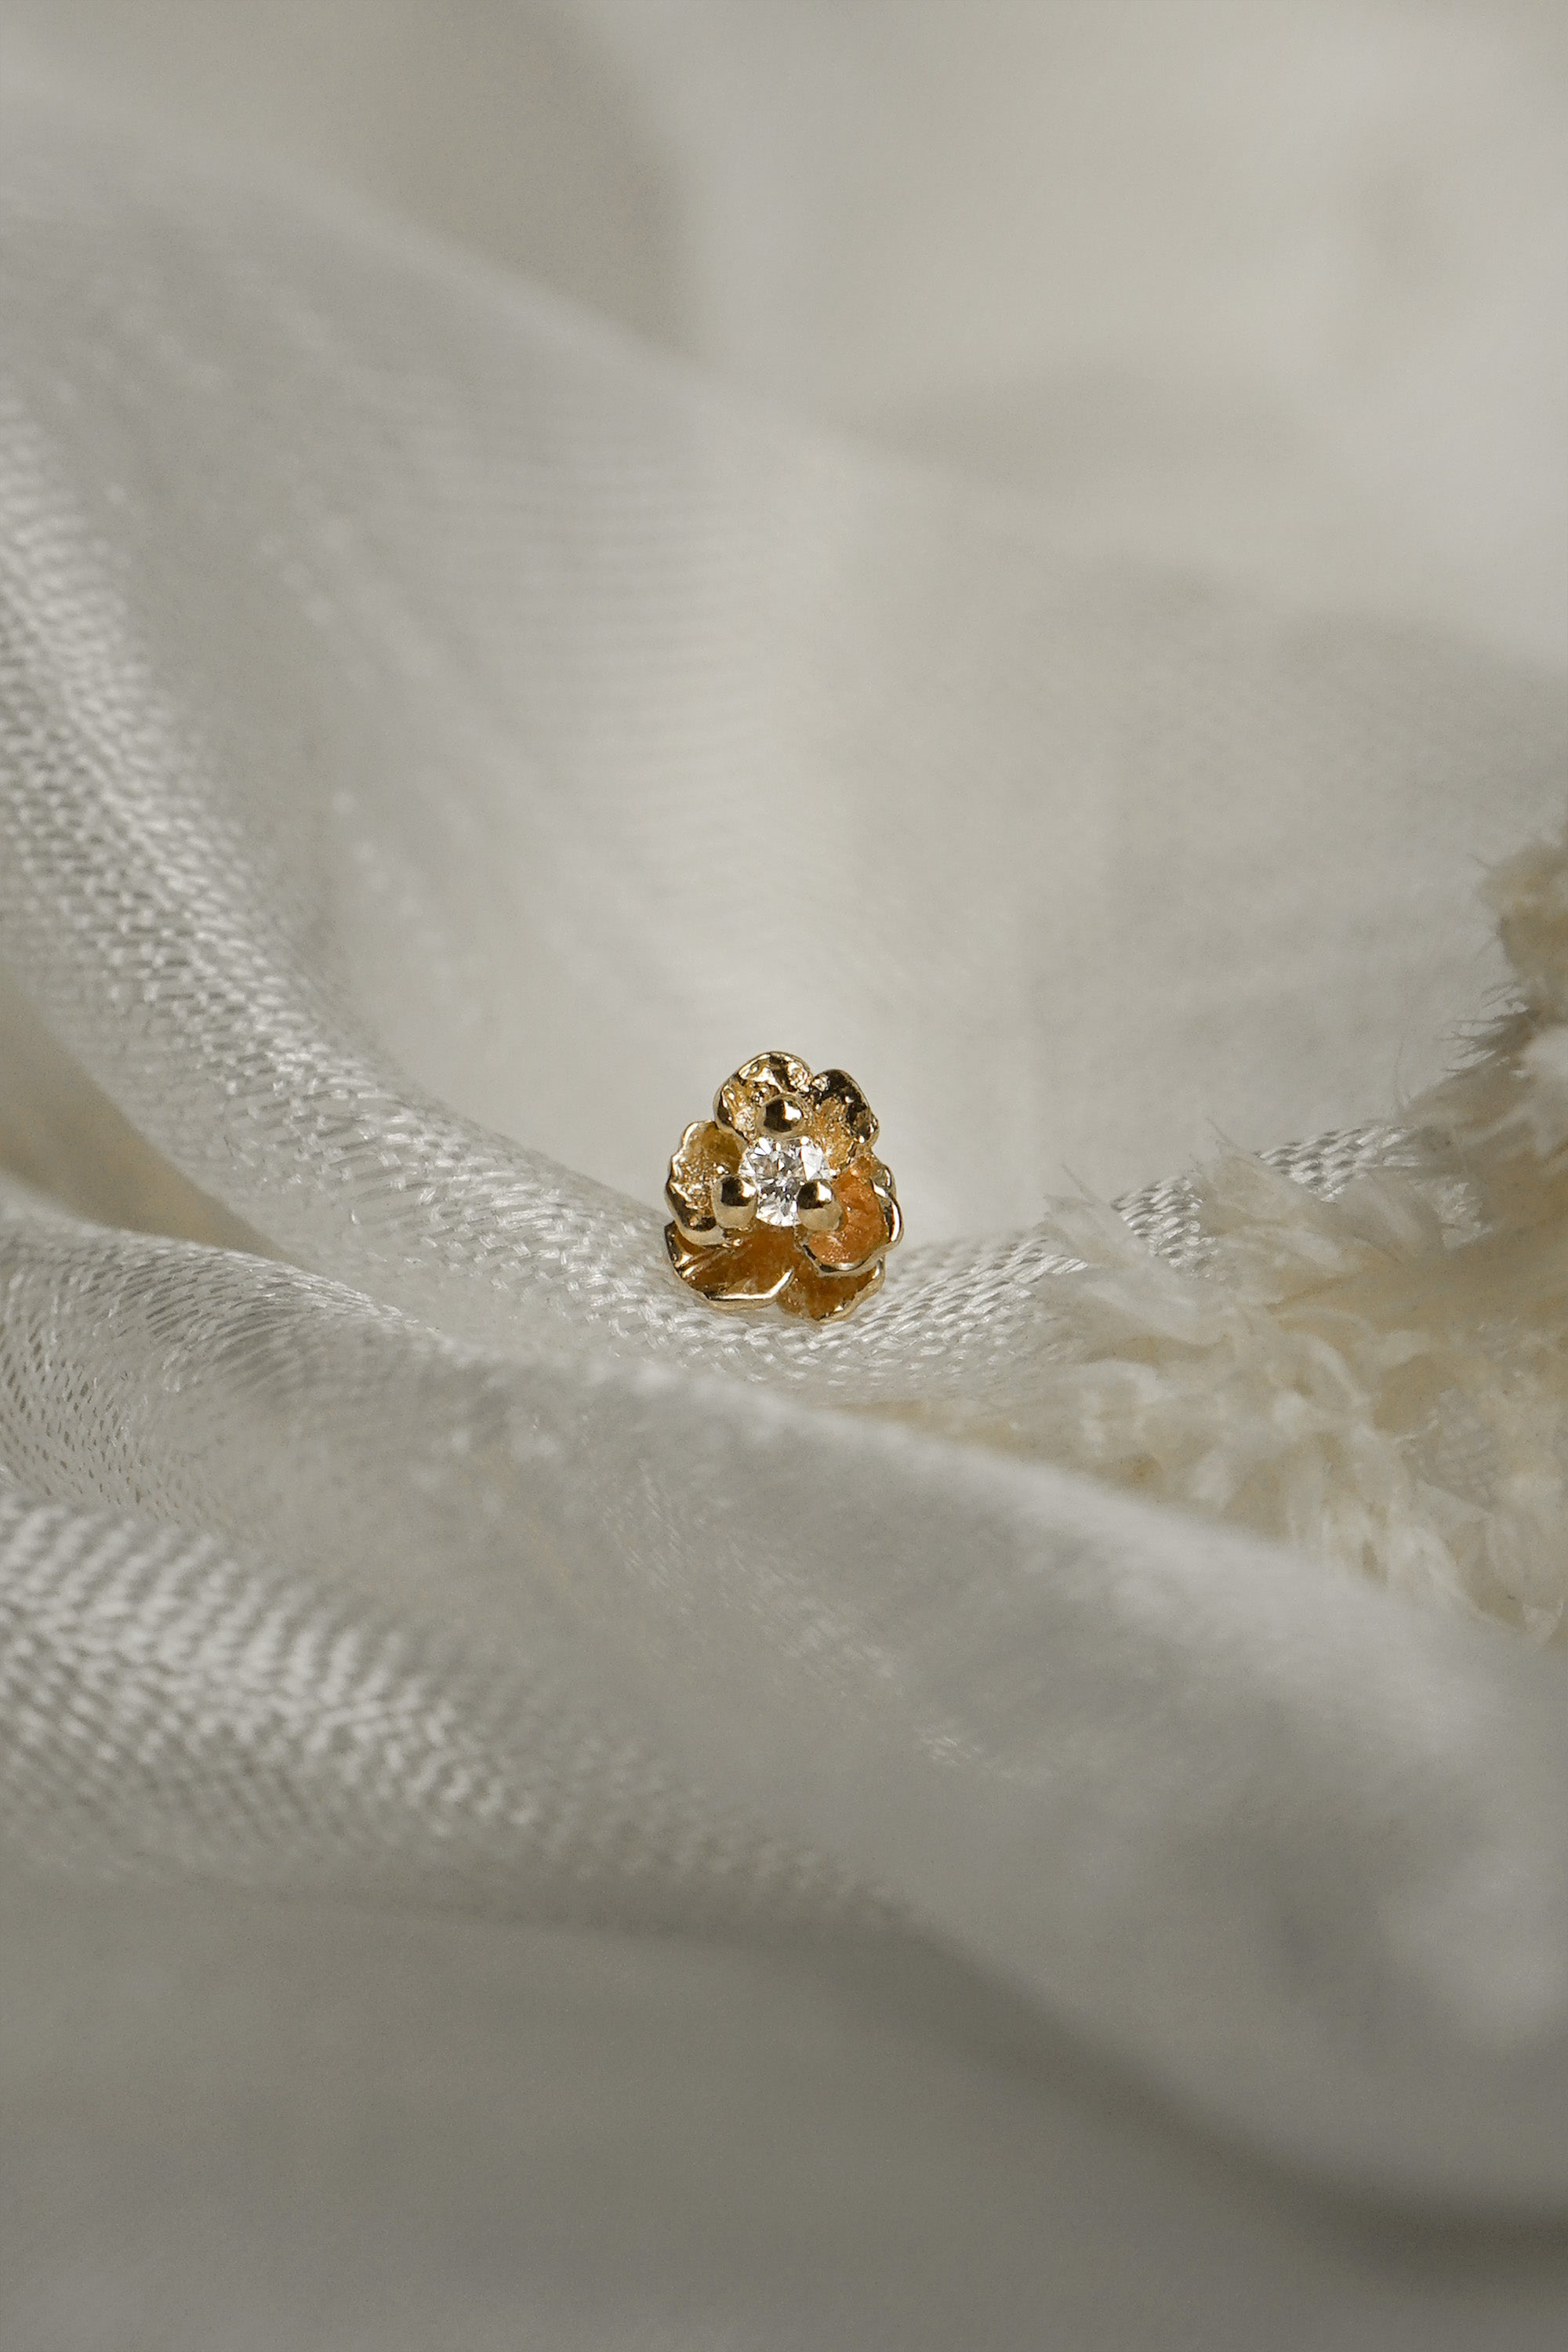 A product photo of a Pansy stud by Laurie Fleming Jewellery. It features a hand-carved miniature Pansy flower in solid 14k gold with a round brilliant cut diamond centre. The diamond can be swapped out for any birthstone. The stud is resting on some raw white silk.